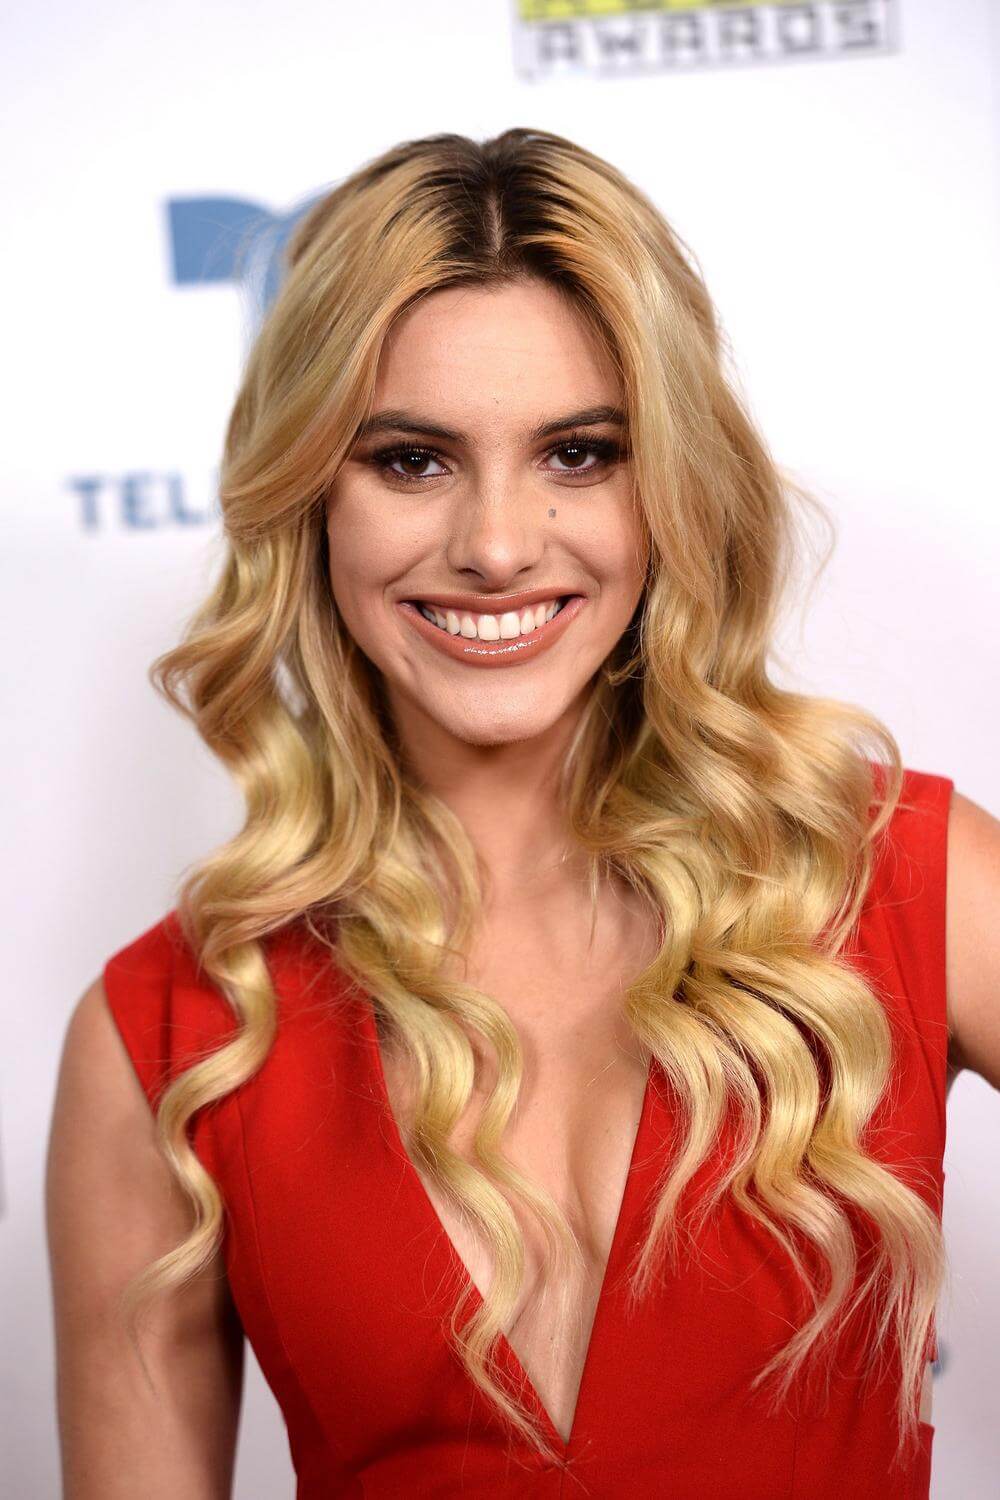 70+ Hot Pictures Of Lele Pons Are Like The Most Tastiest Sexy Chocolate You Ever Had 310